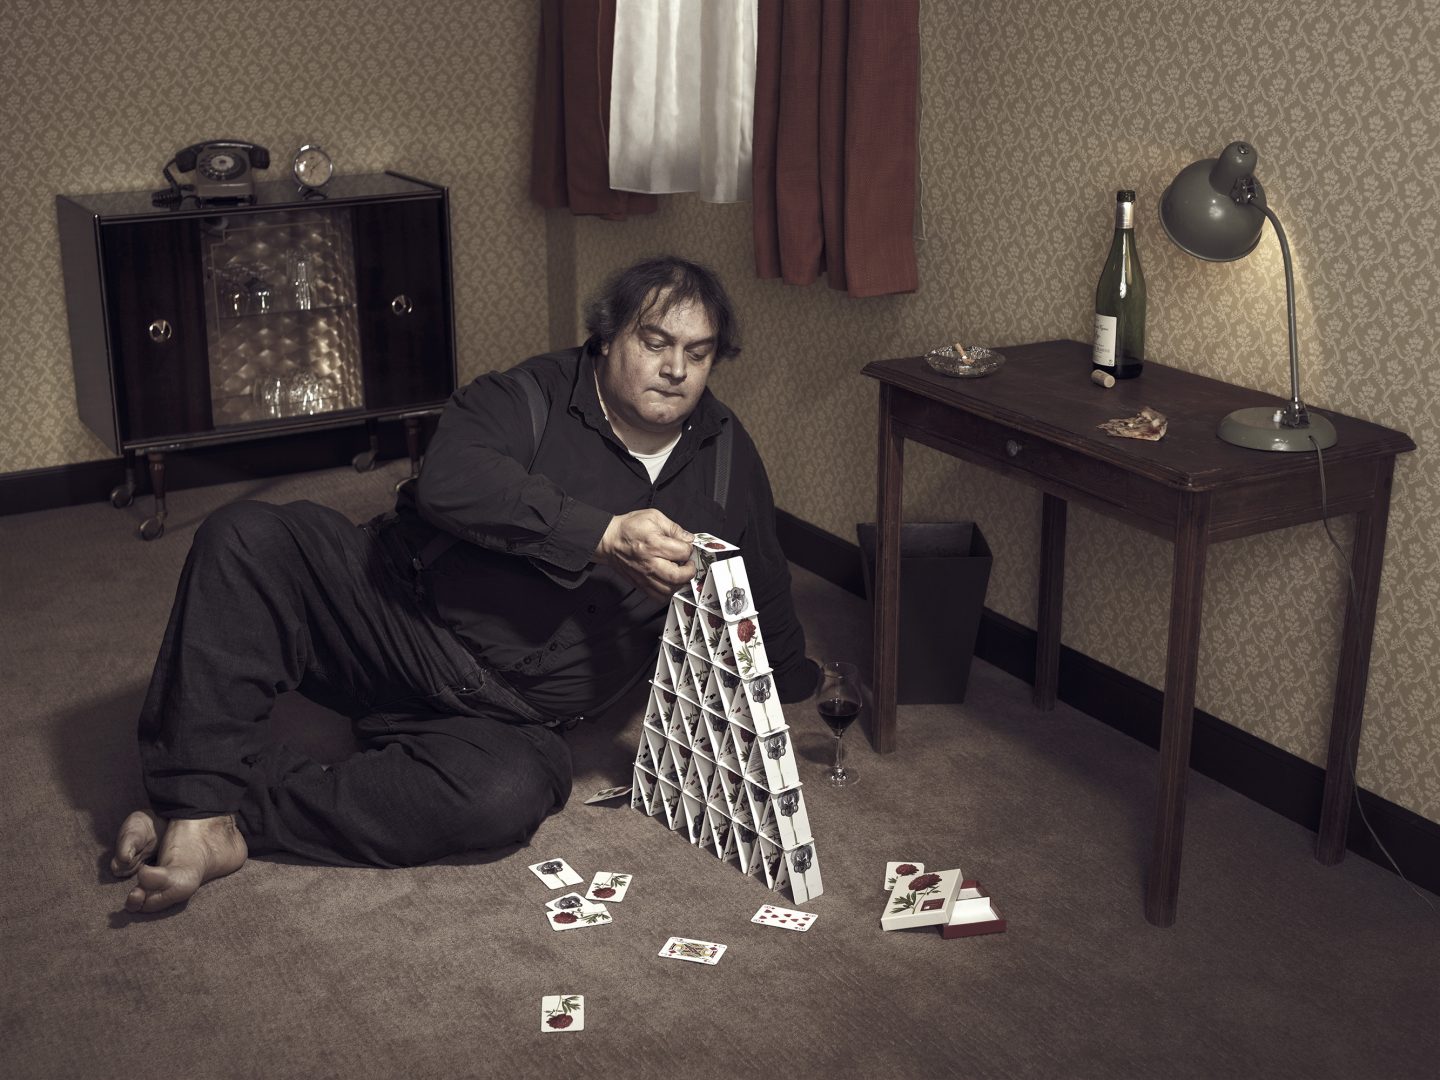 Man on floor is building a card house in room 42 by Stefan Rappo